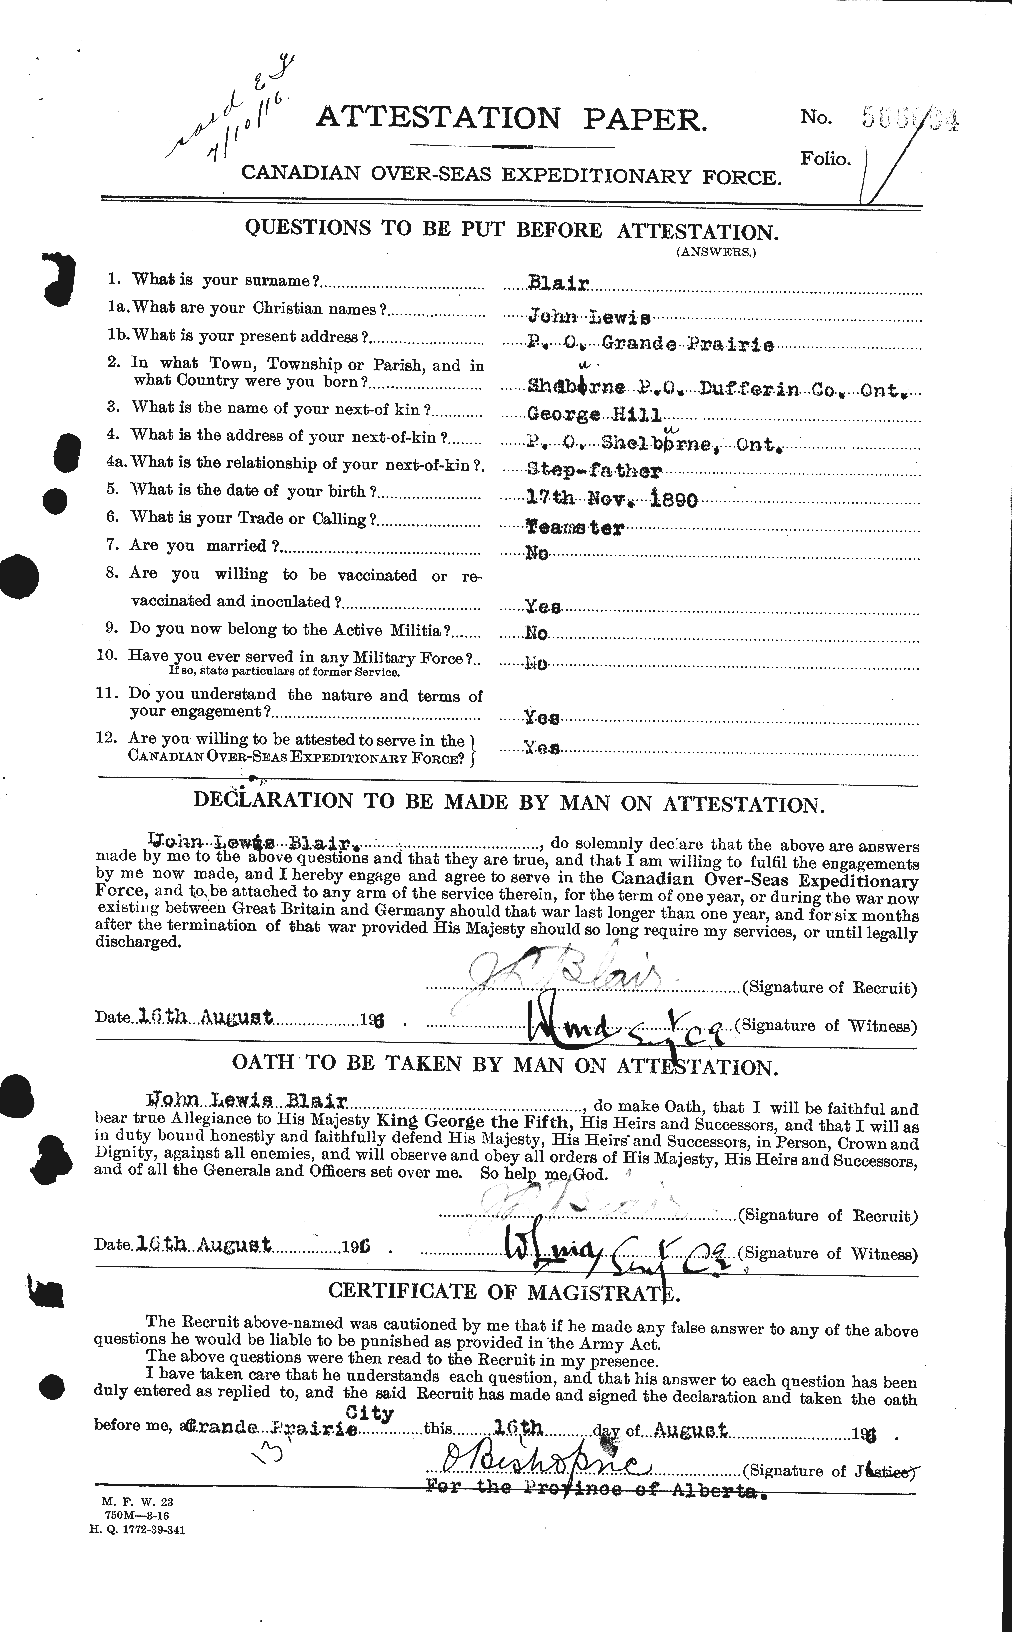 Personnel Records of the First World War - CEF 243096a